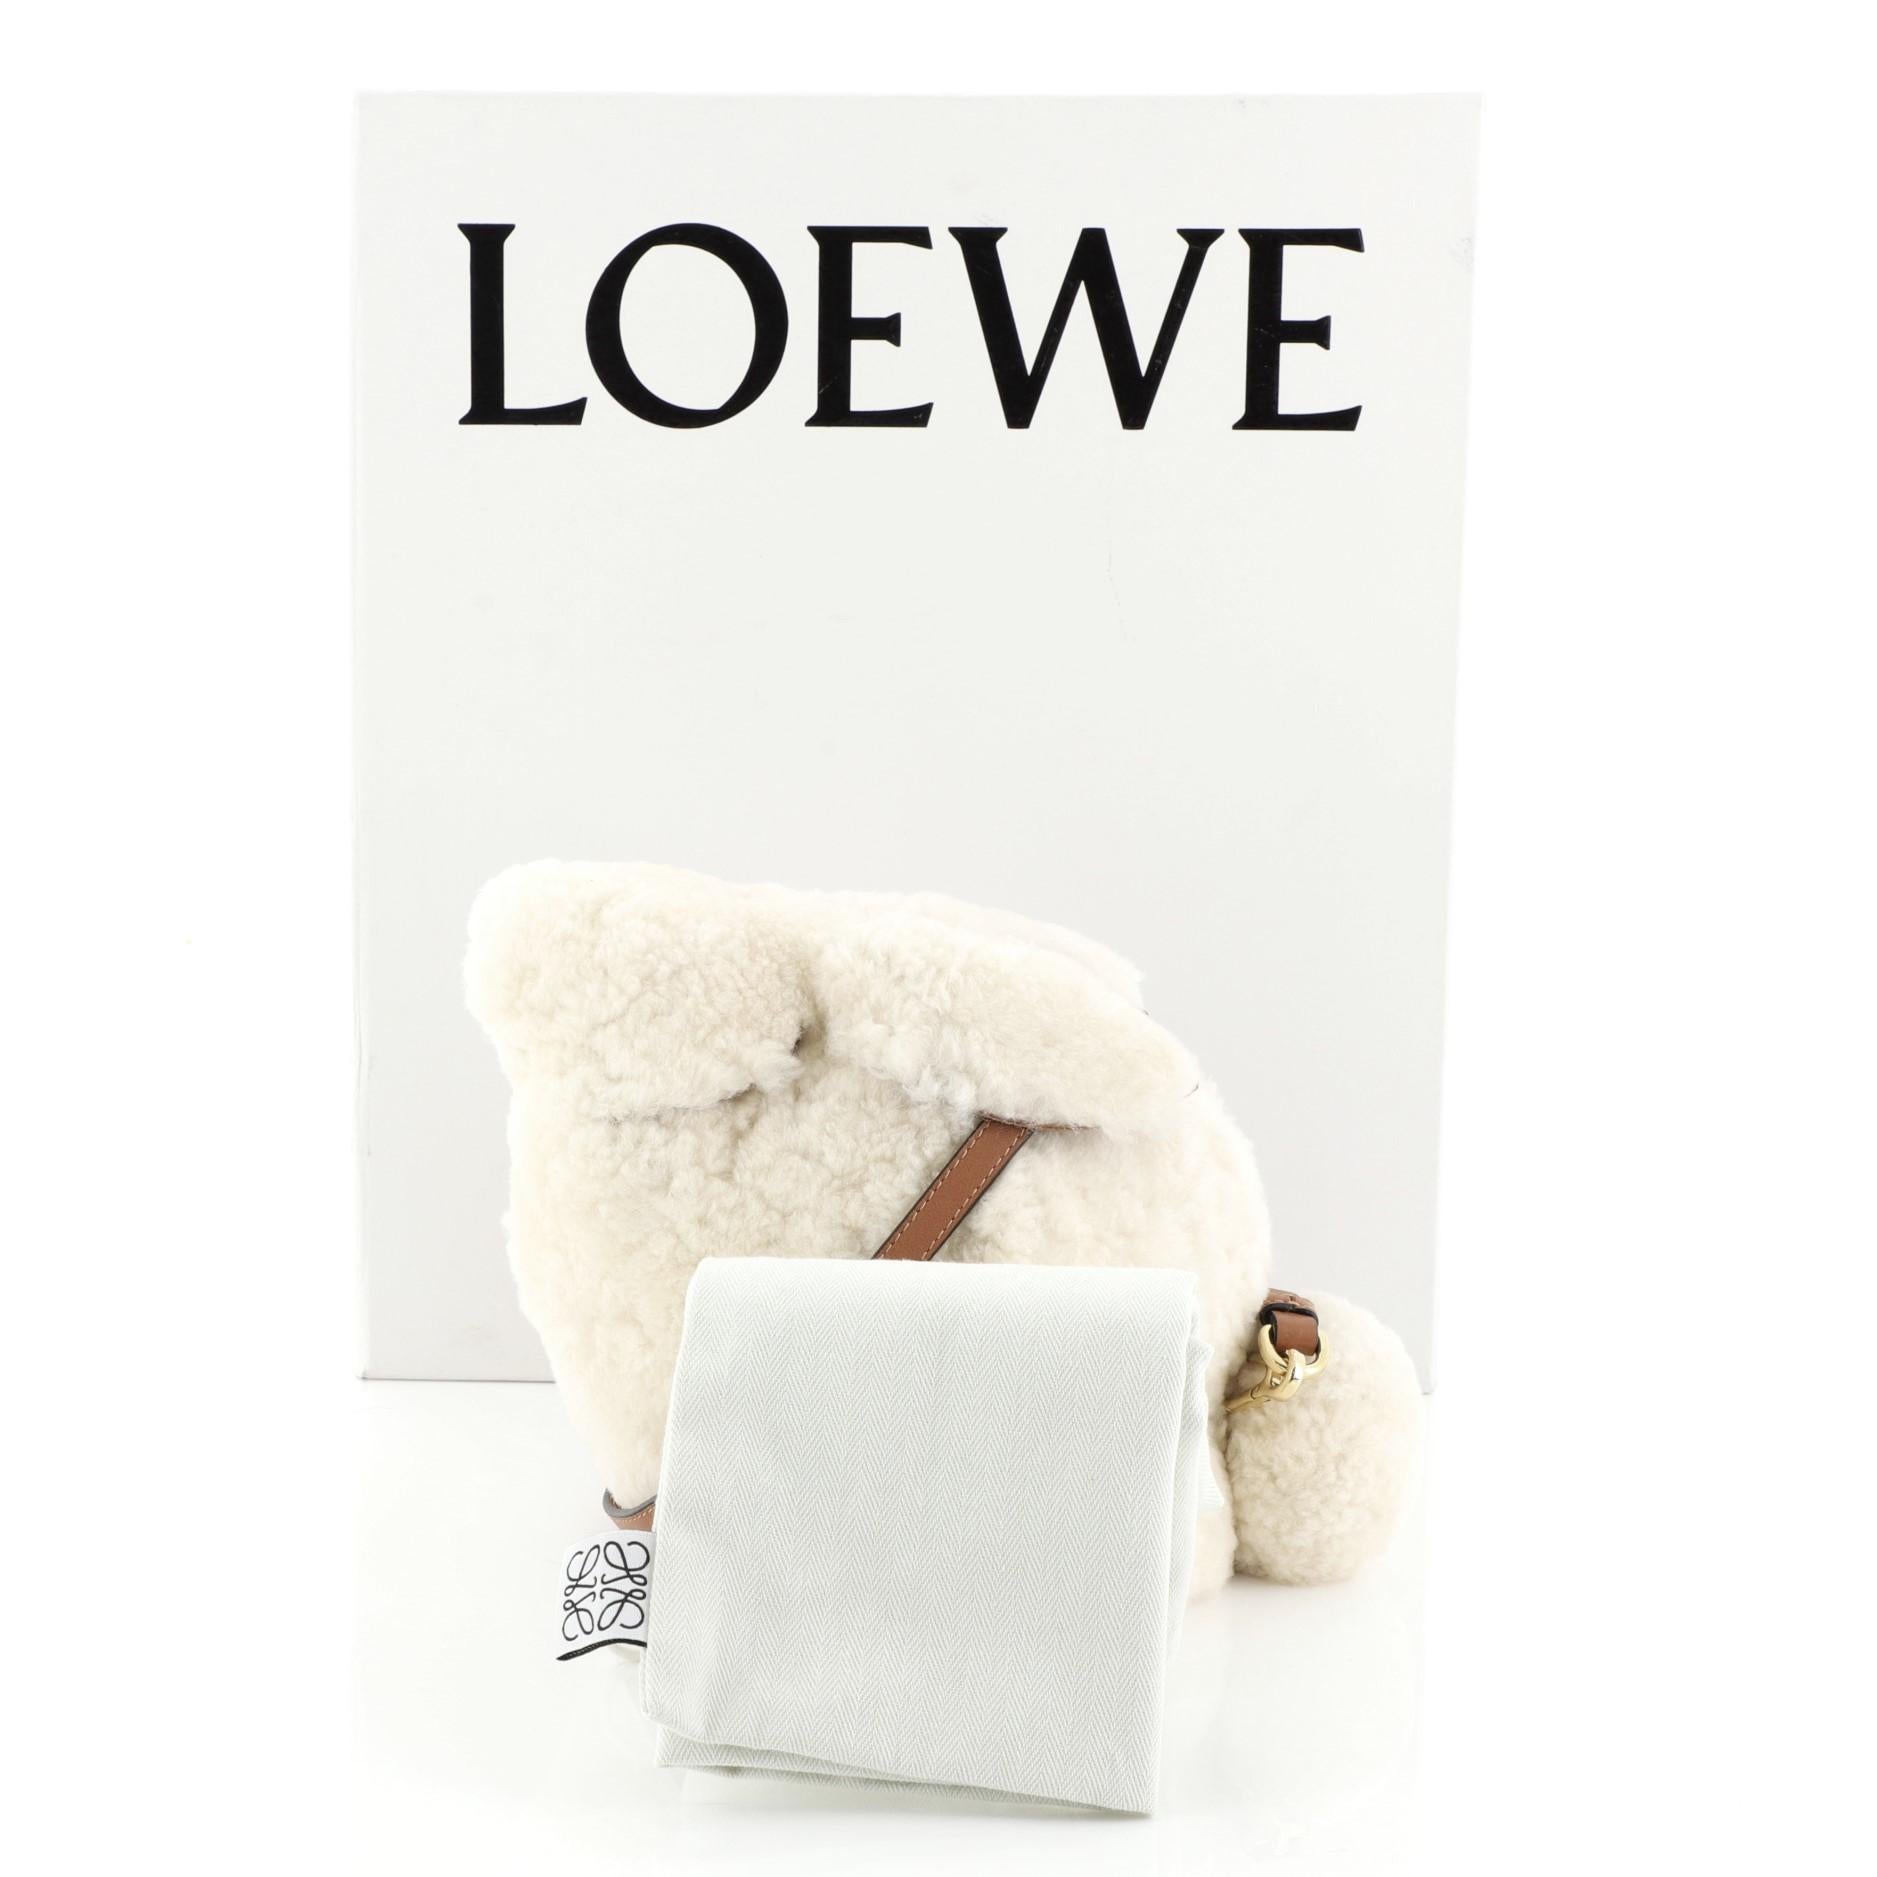 This Loewe Rabbit Crossbody Bag Shearling Mini, crafted from white shearling, features flat leather strap, leather trim, and gold-tone hardware. Its zip closure opens to a brown leather interior. 

Estimated Retail Price: $1,650
Condition: